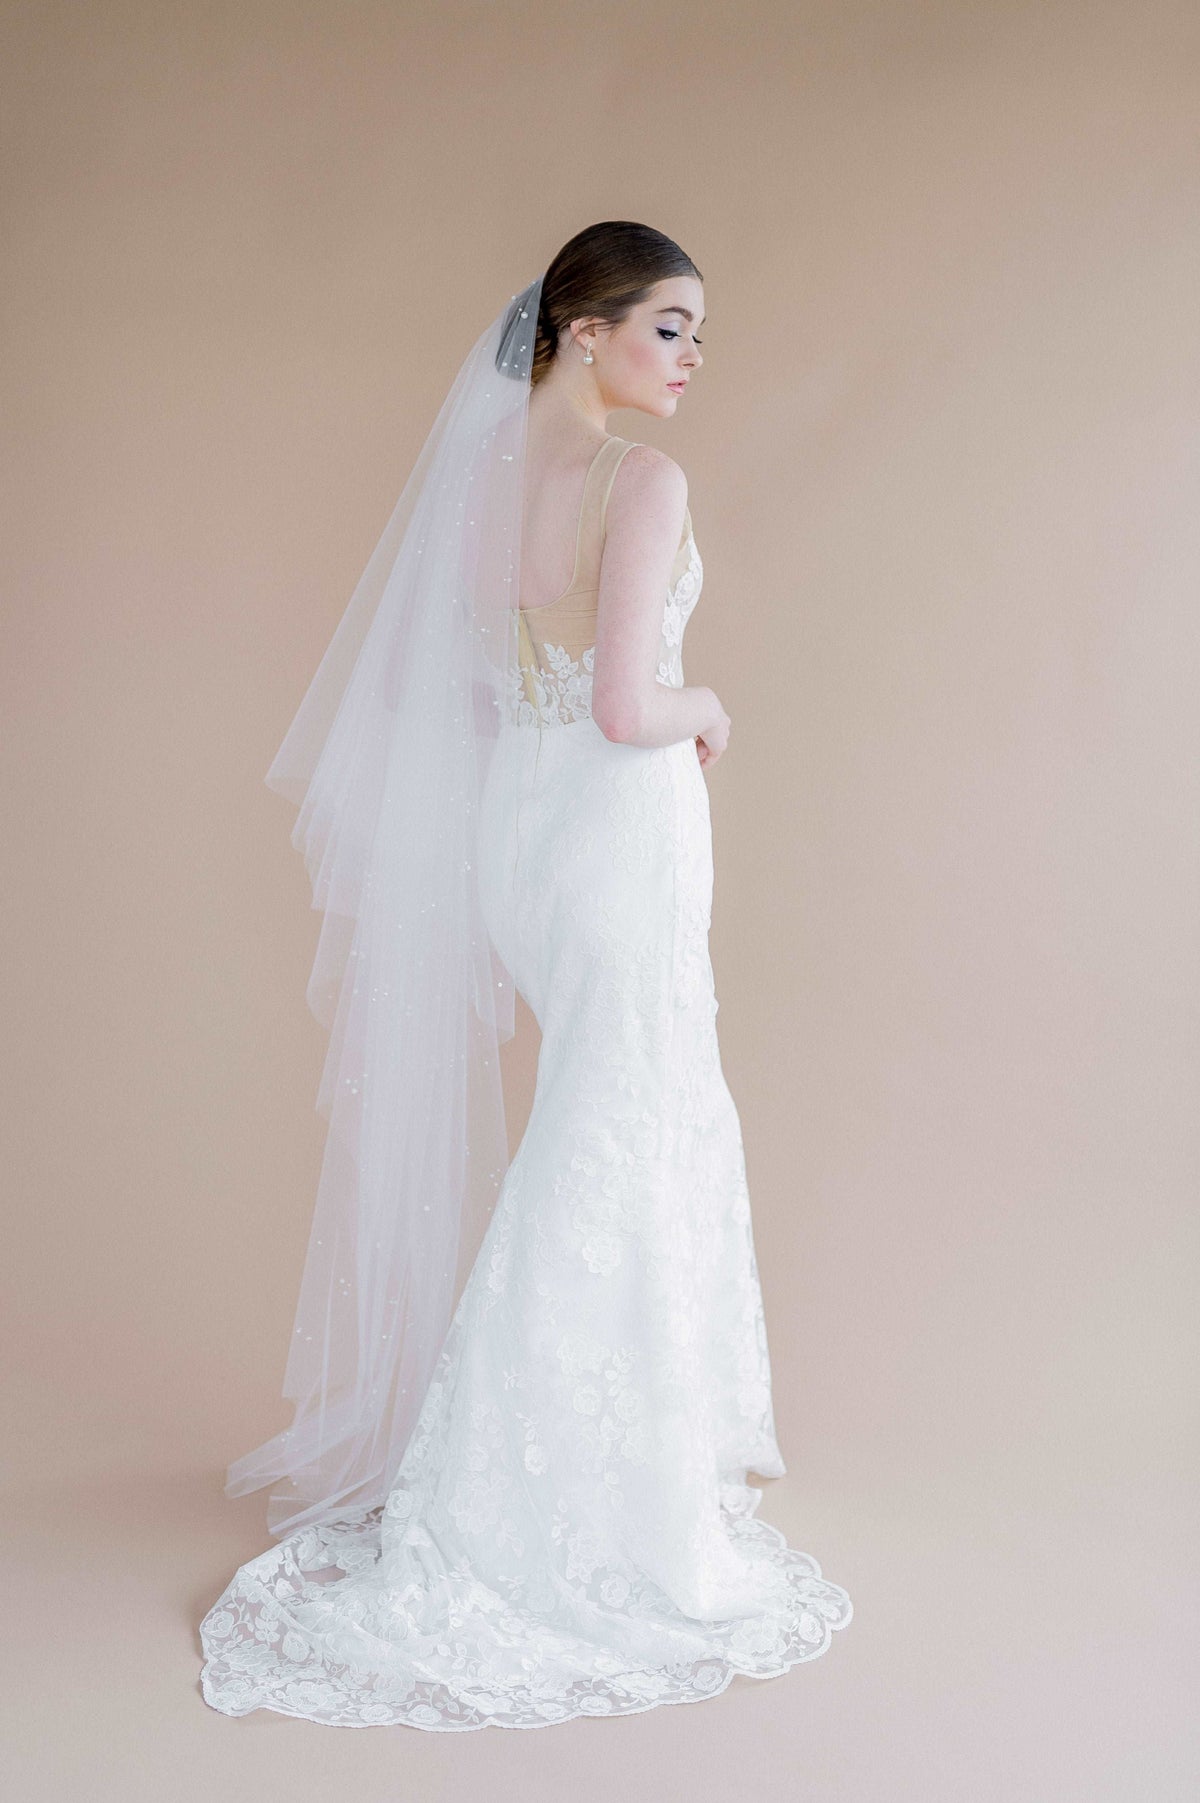 Marina, a modern shimmery floral lace wedding dress. Handmade in Toronto by Catherine Langlois Bridal Design.